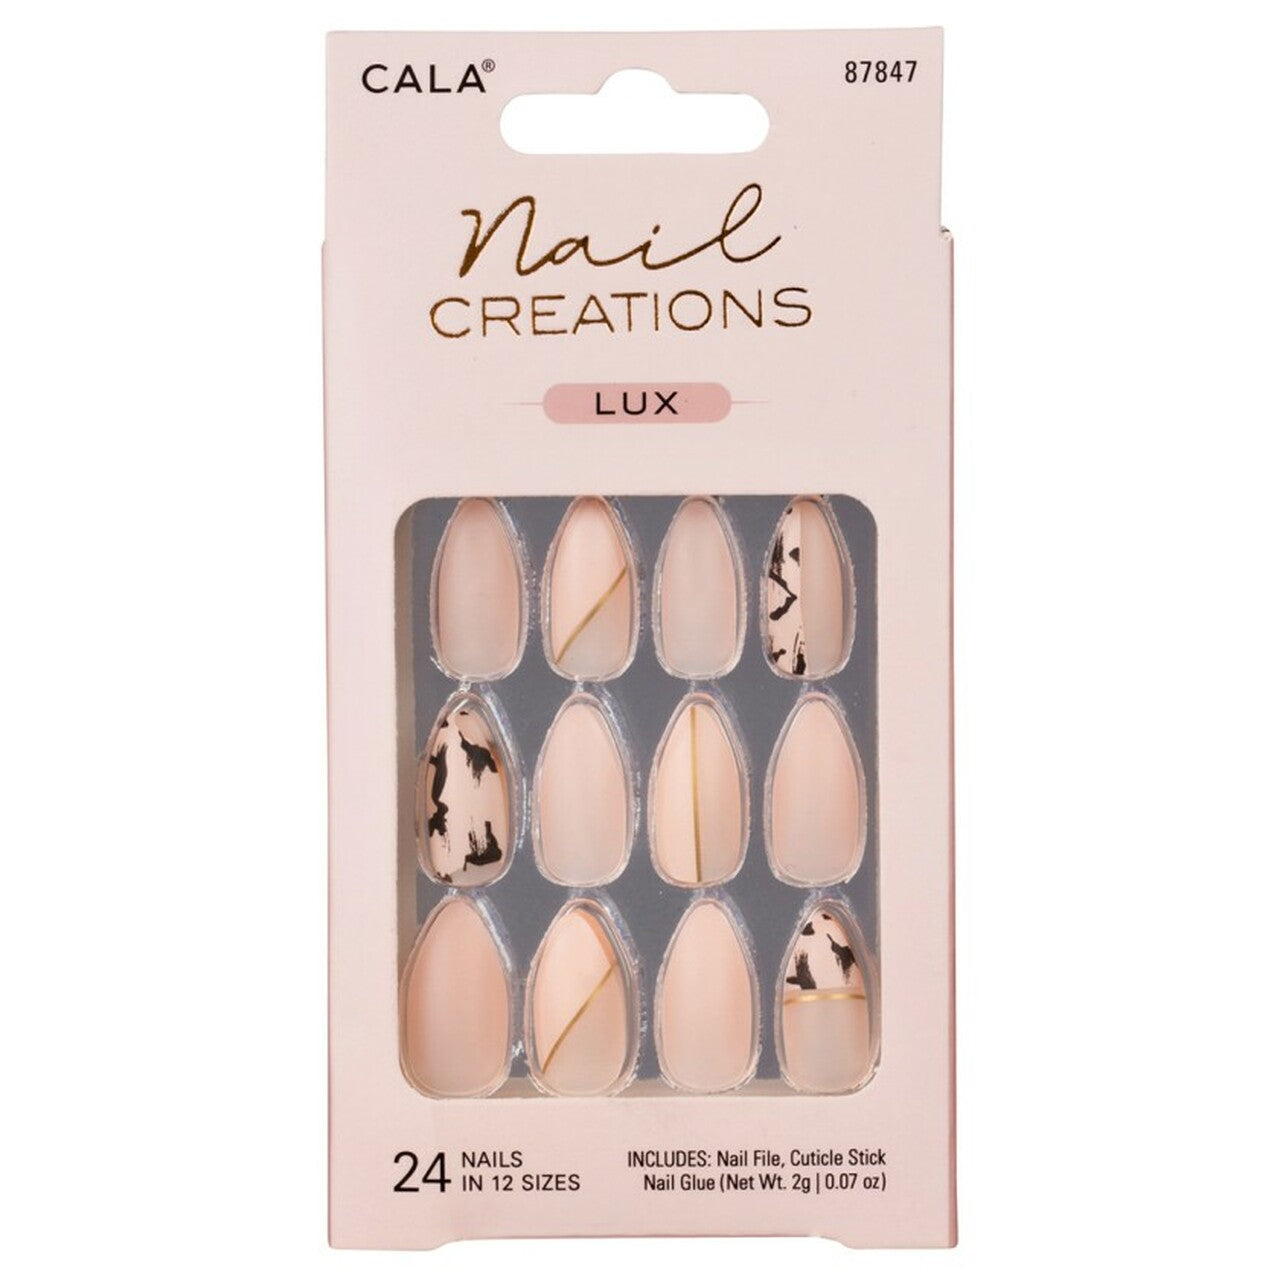 Cala - Nail Creations Lux Kit Nude Abstract